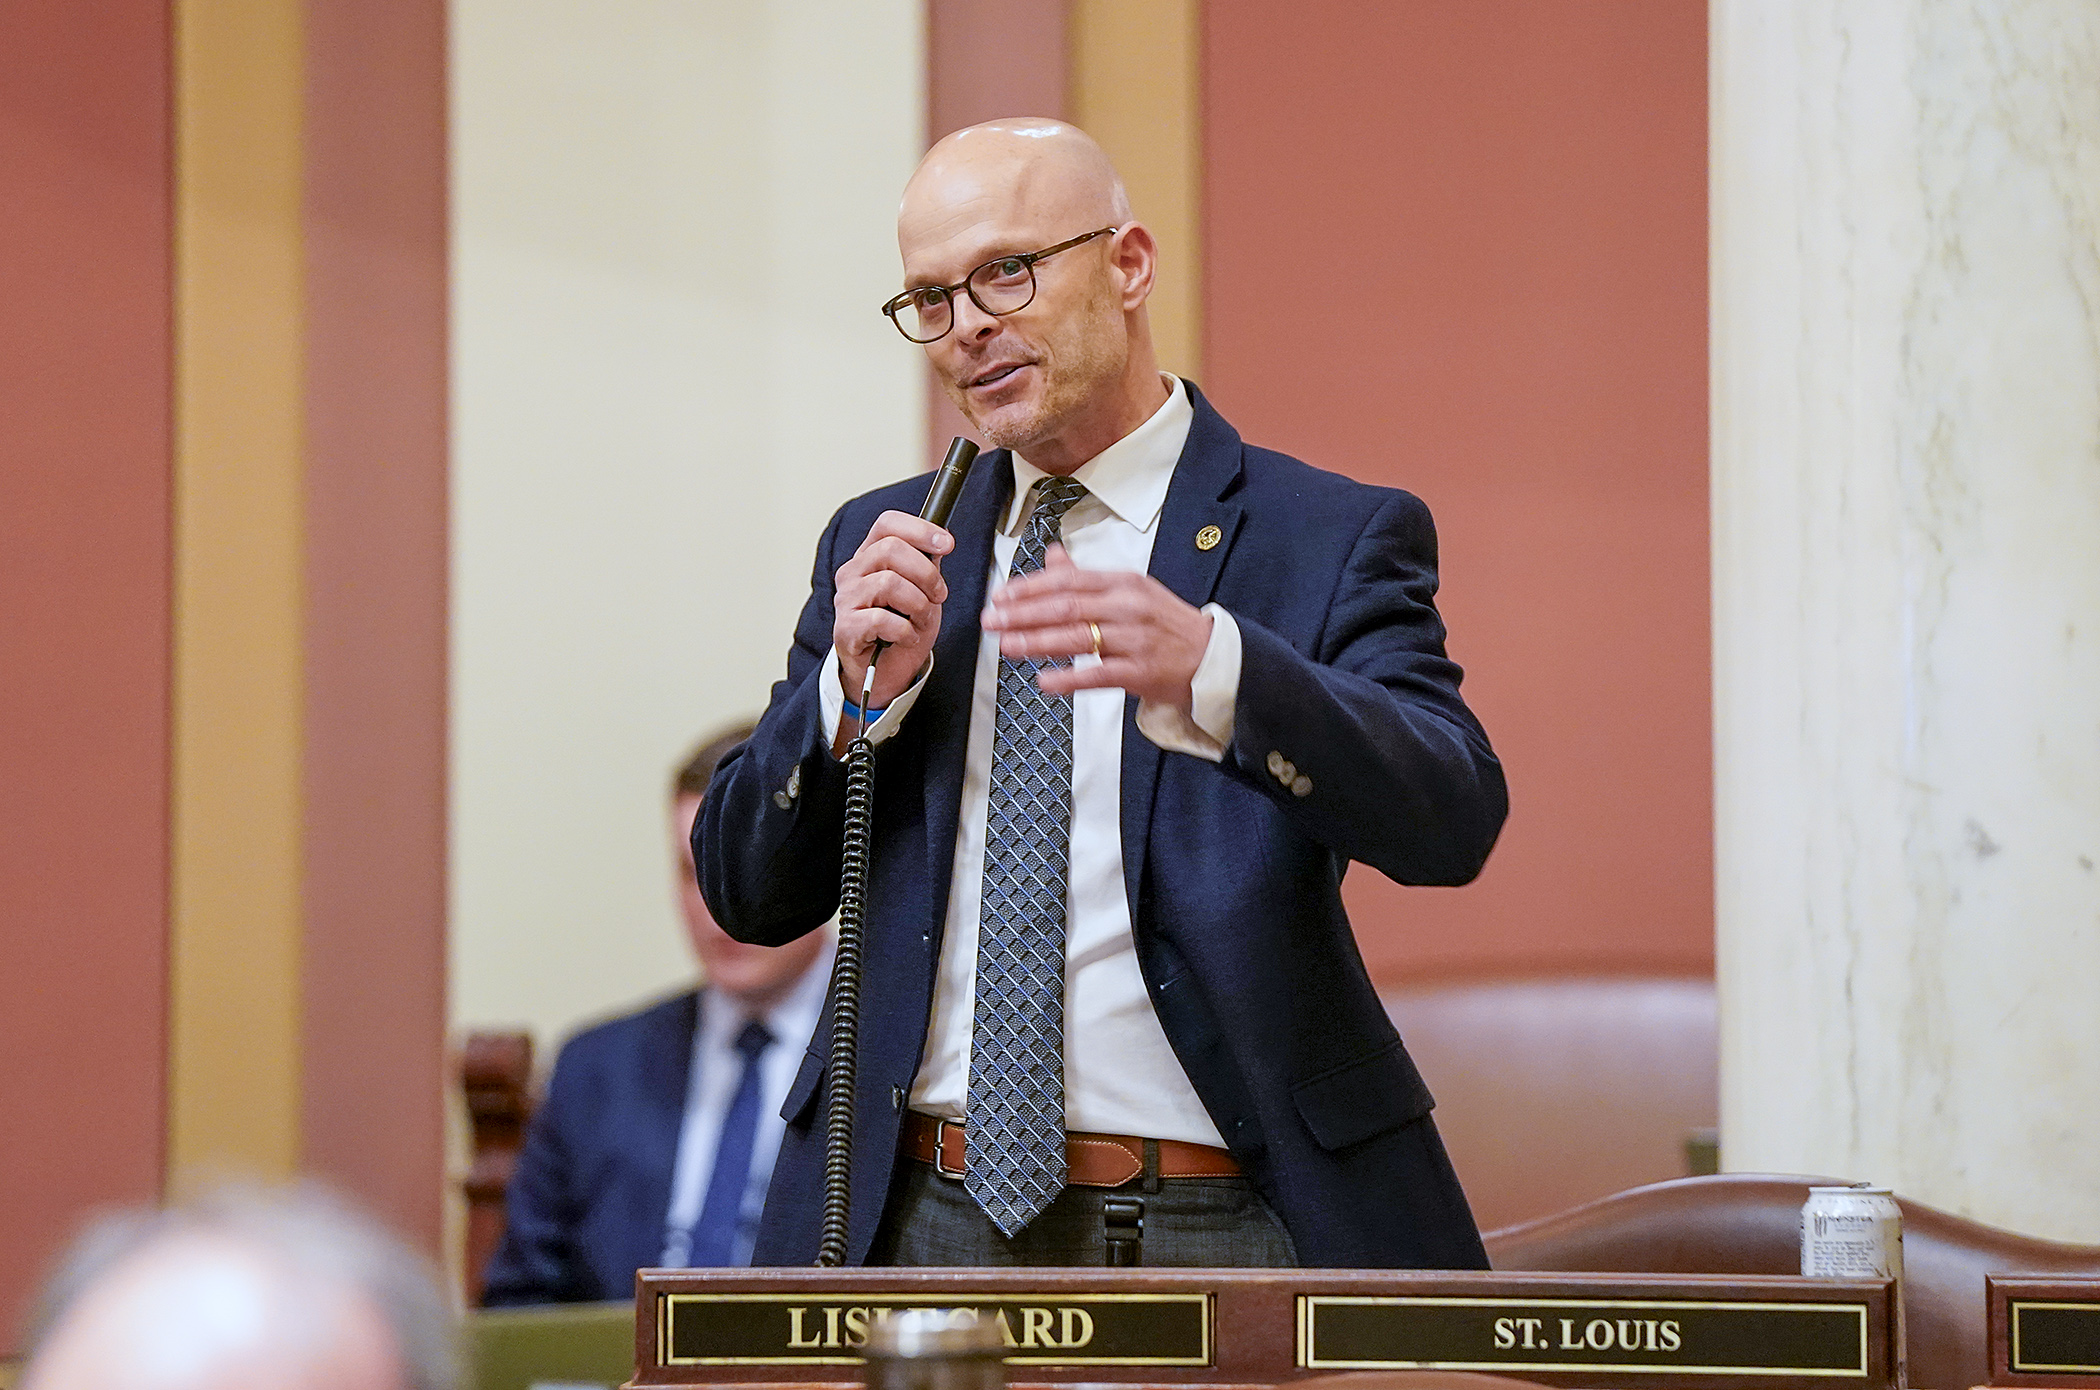 Rep. Dave Lislegard speaks about his friendship with the late Sen. David Tomassoni Wednesday while presenting a bill to designate U.S. Highway 169, between Marble and Mountain Iron, as the “Senator David J. Tomassoni Memorial Cross Range Expressway.” (Photo by Michele Jokinen)